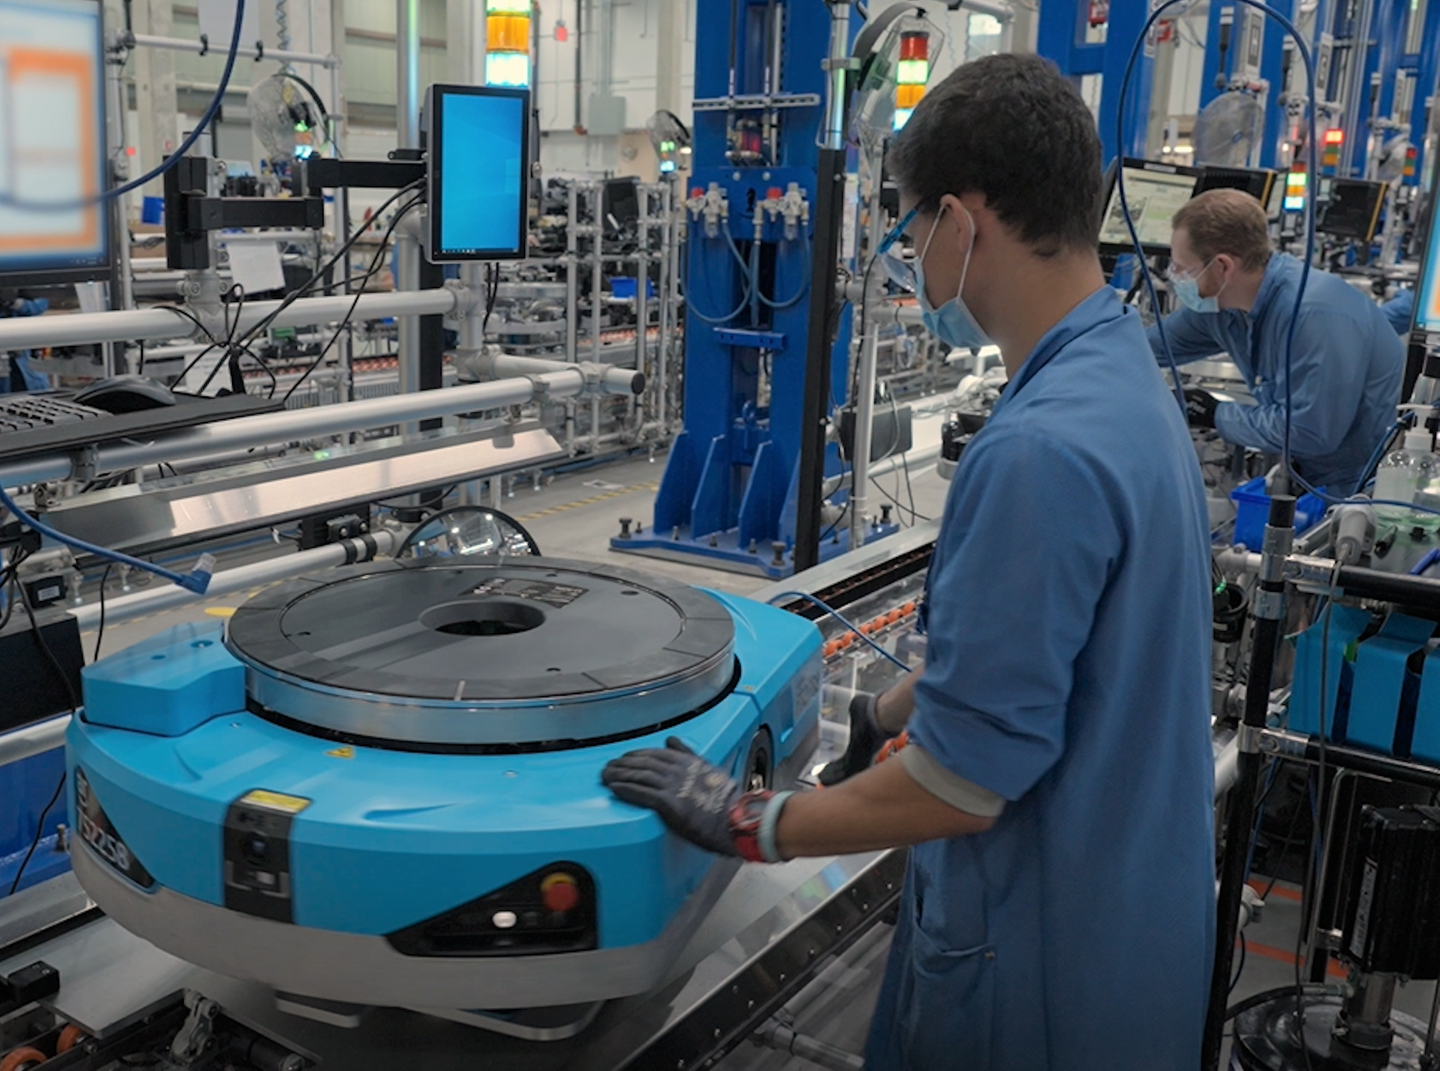 Amazon robotics working working on assembly line